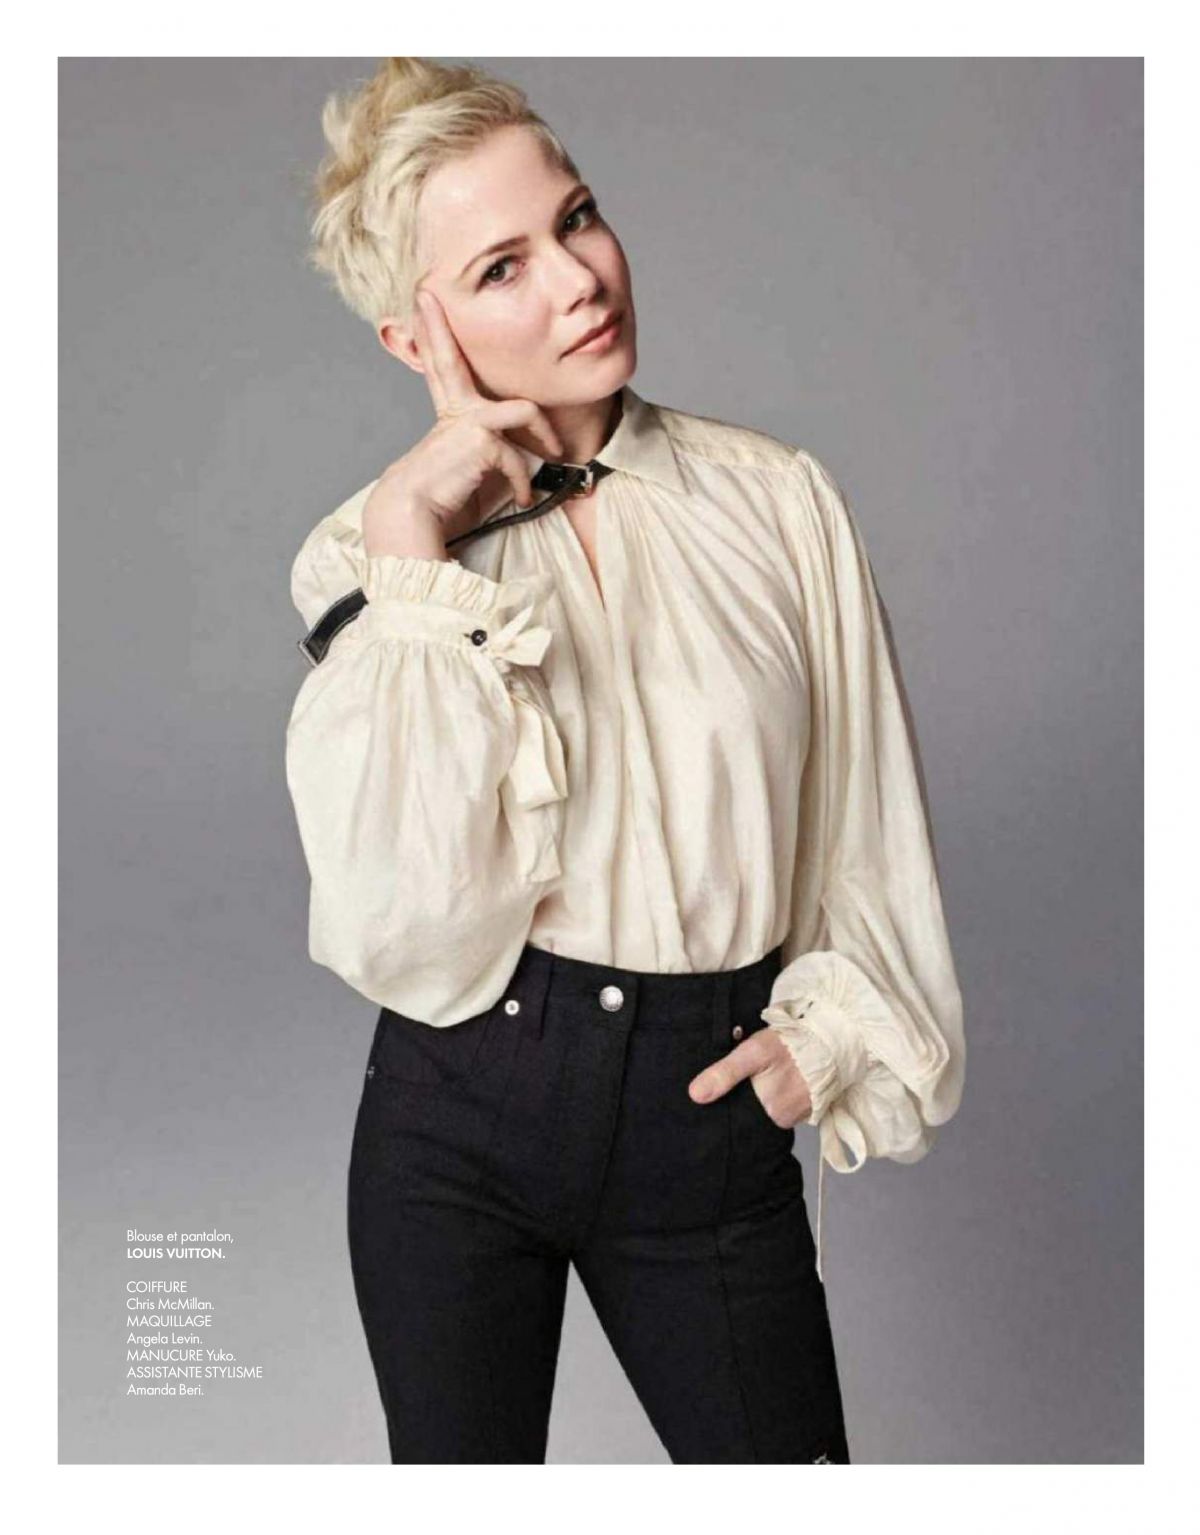 MICHELLE WILLIAMS in Elle Magazine, France January 2018 Issue